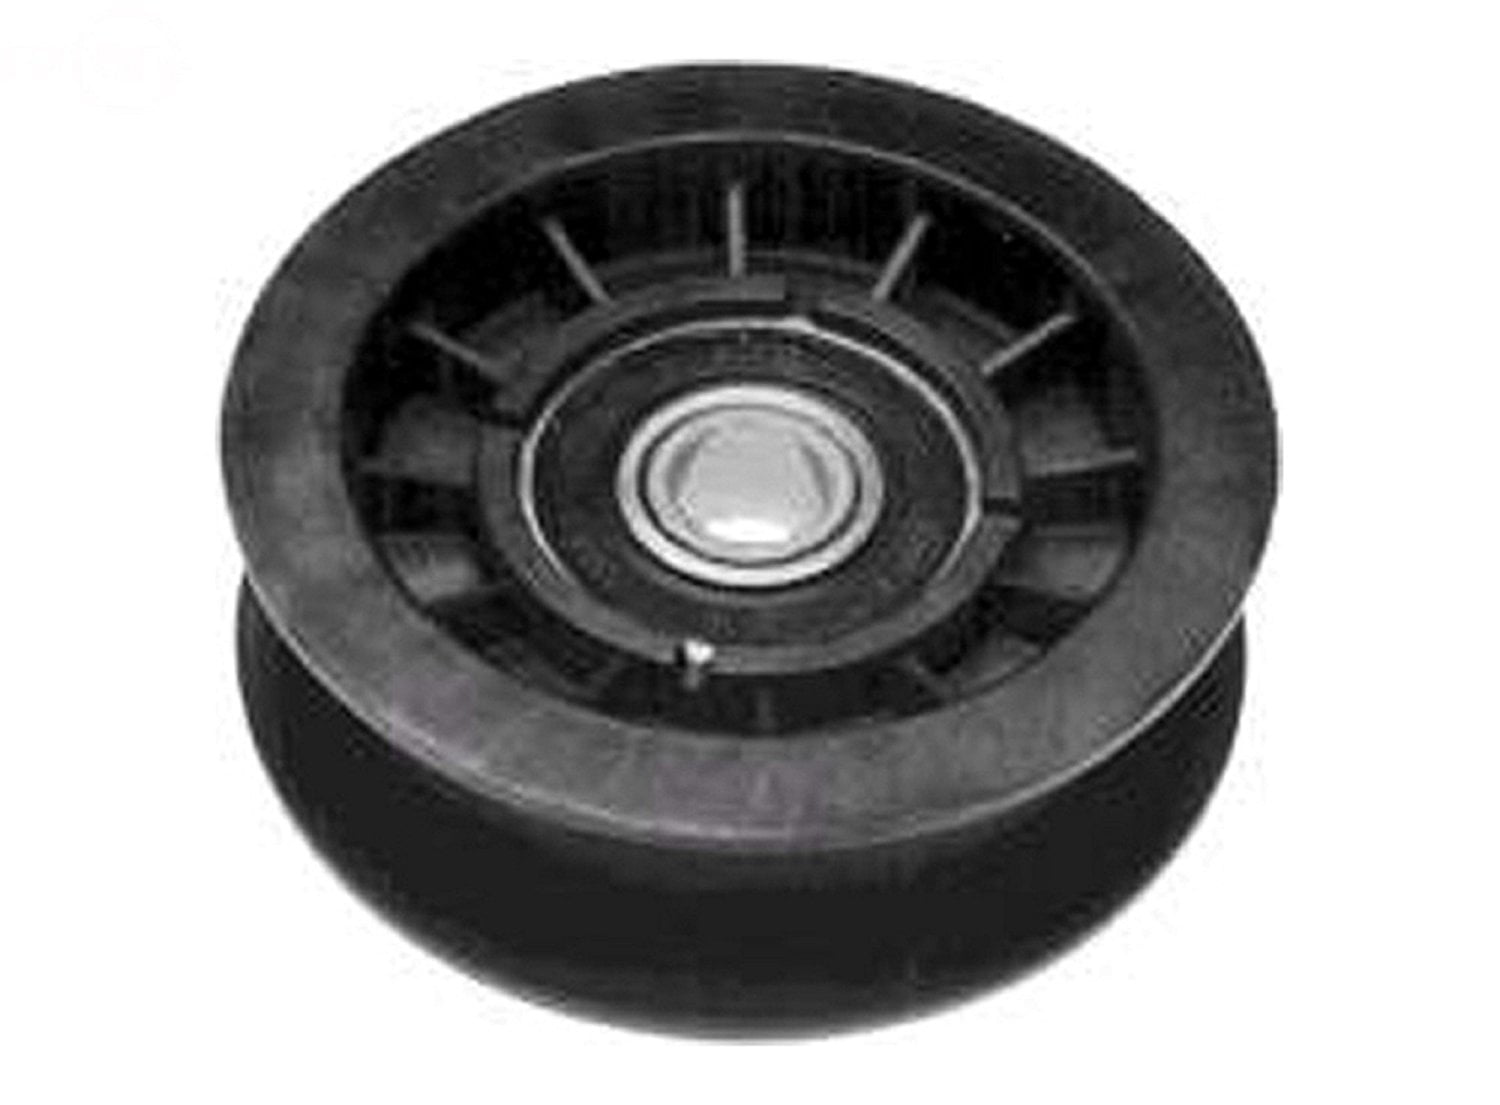 FLAT IDLER PULLEY fits MURRAY 91179 421409 491179  7978 